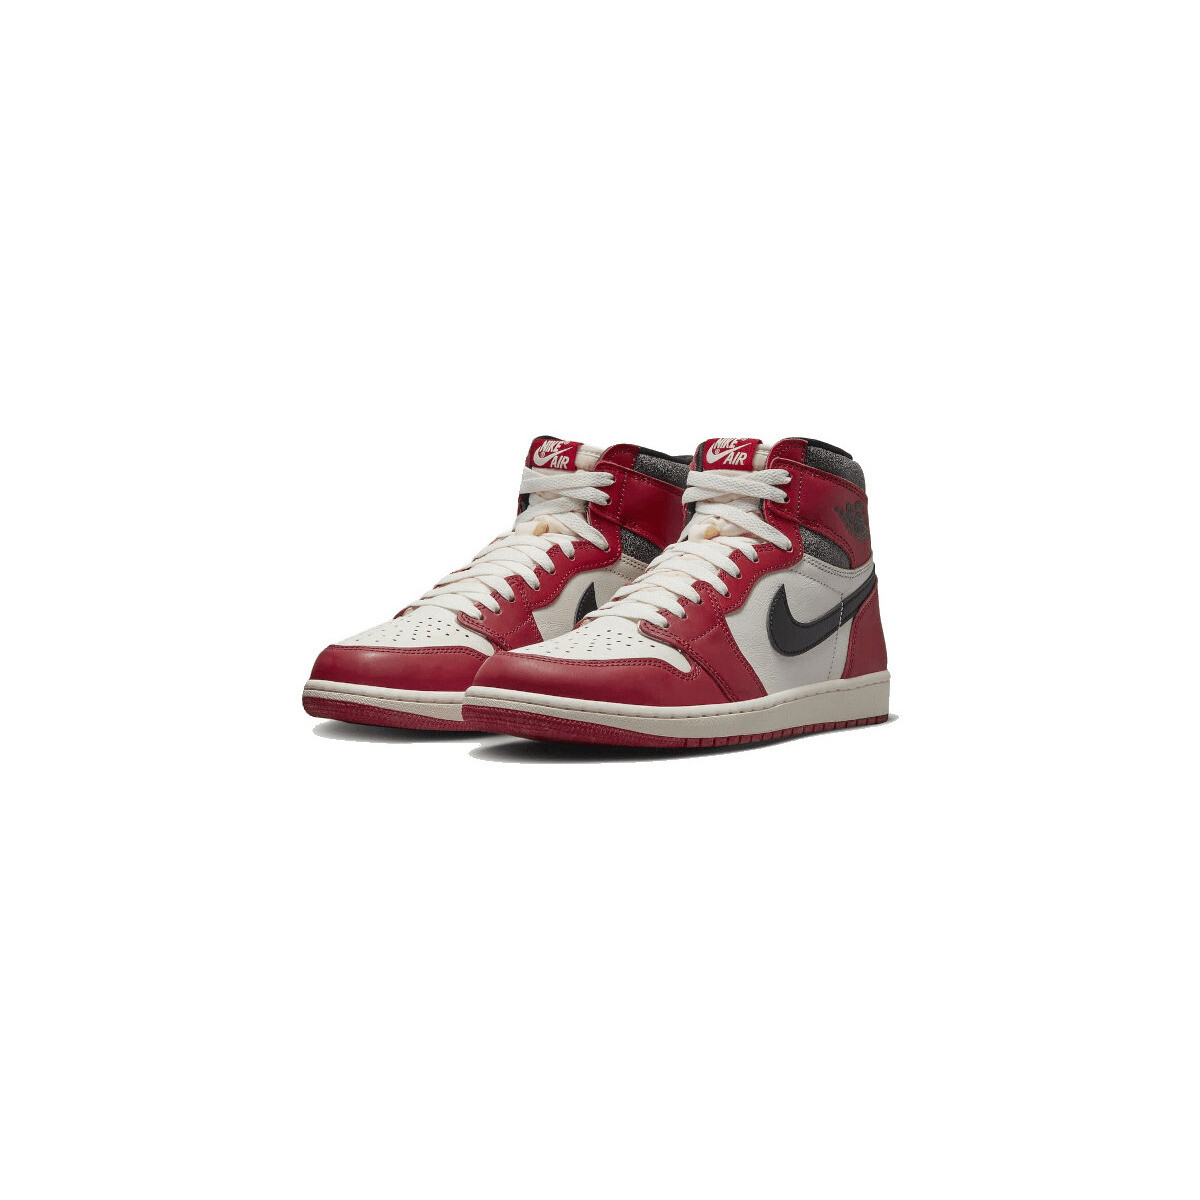 Nike Rouge Air Jordan 1 High Chicago Lost And Found (Reimagined) (GS) V5Y2NsrT